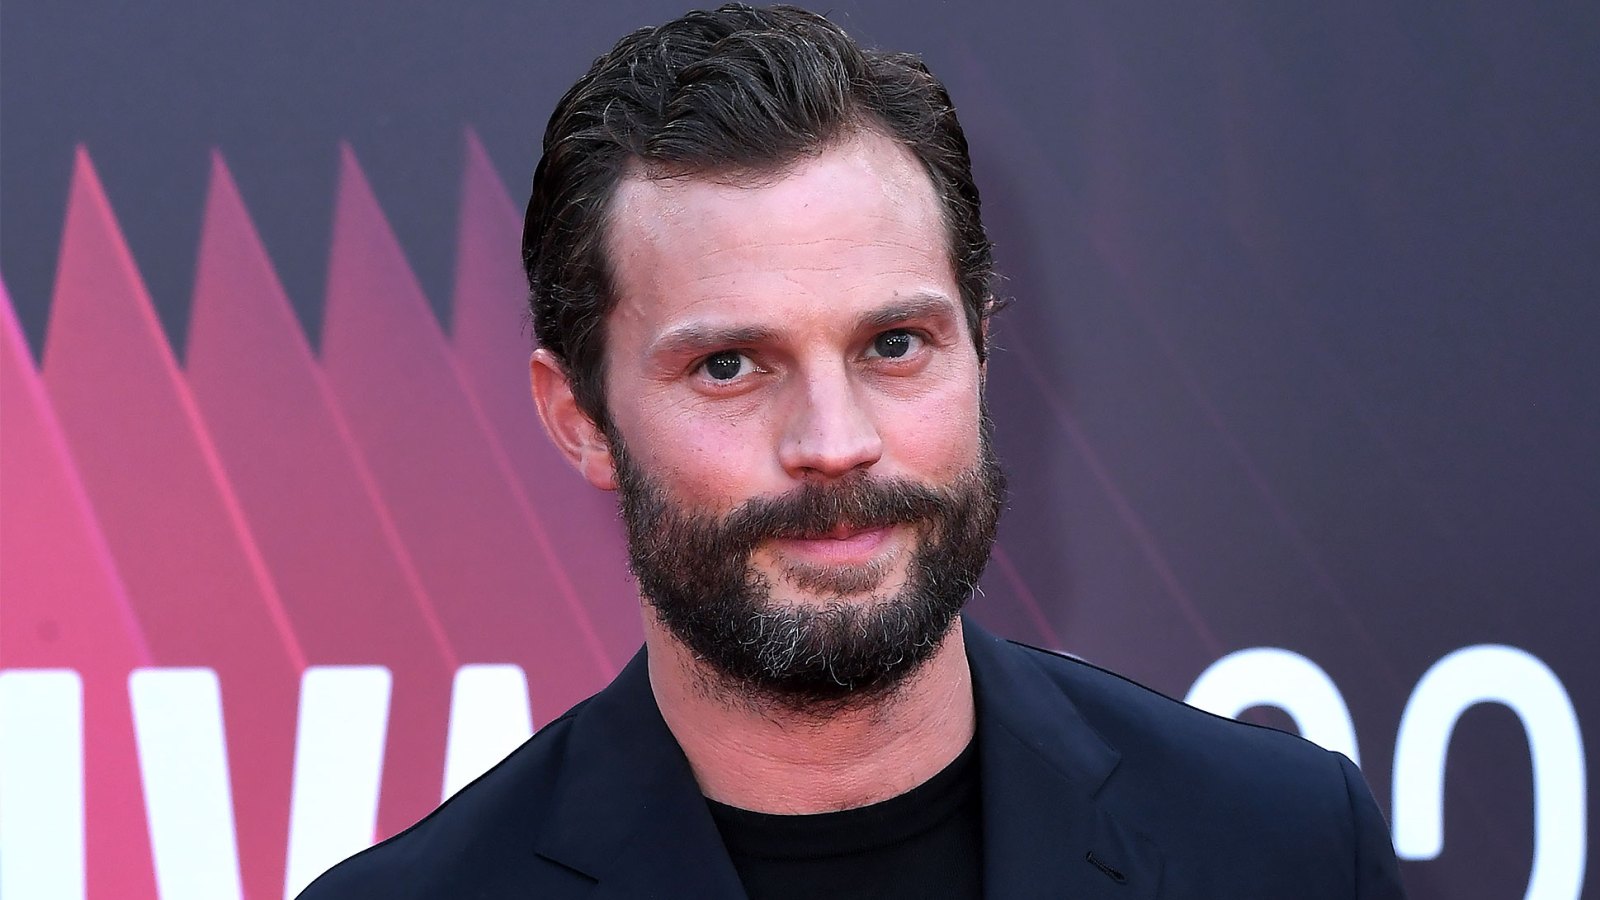 Jamie Dornan: I 'Take Issue' With 'Fifty Shades' Being Known as a 'Joke'